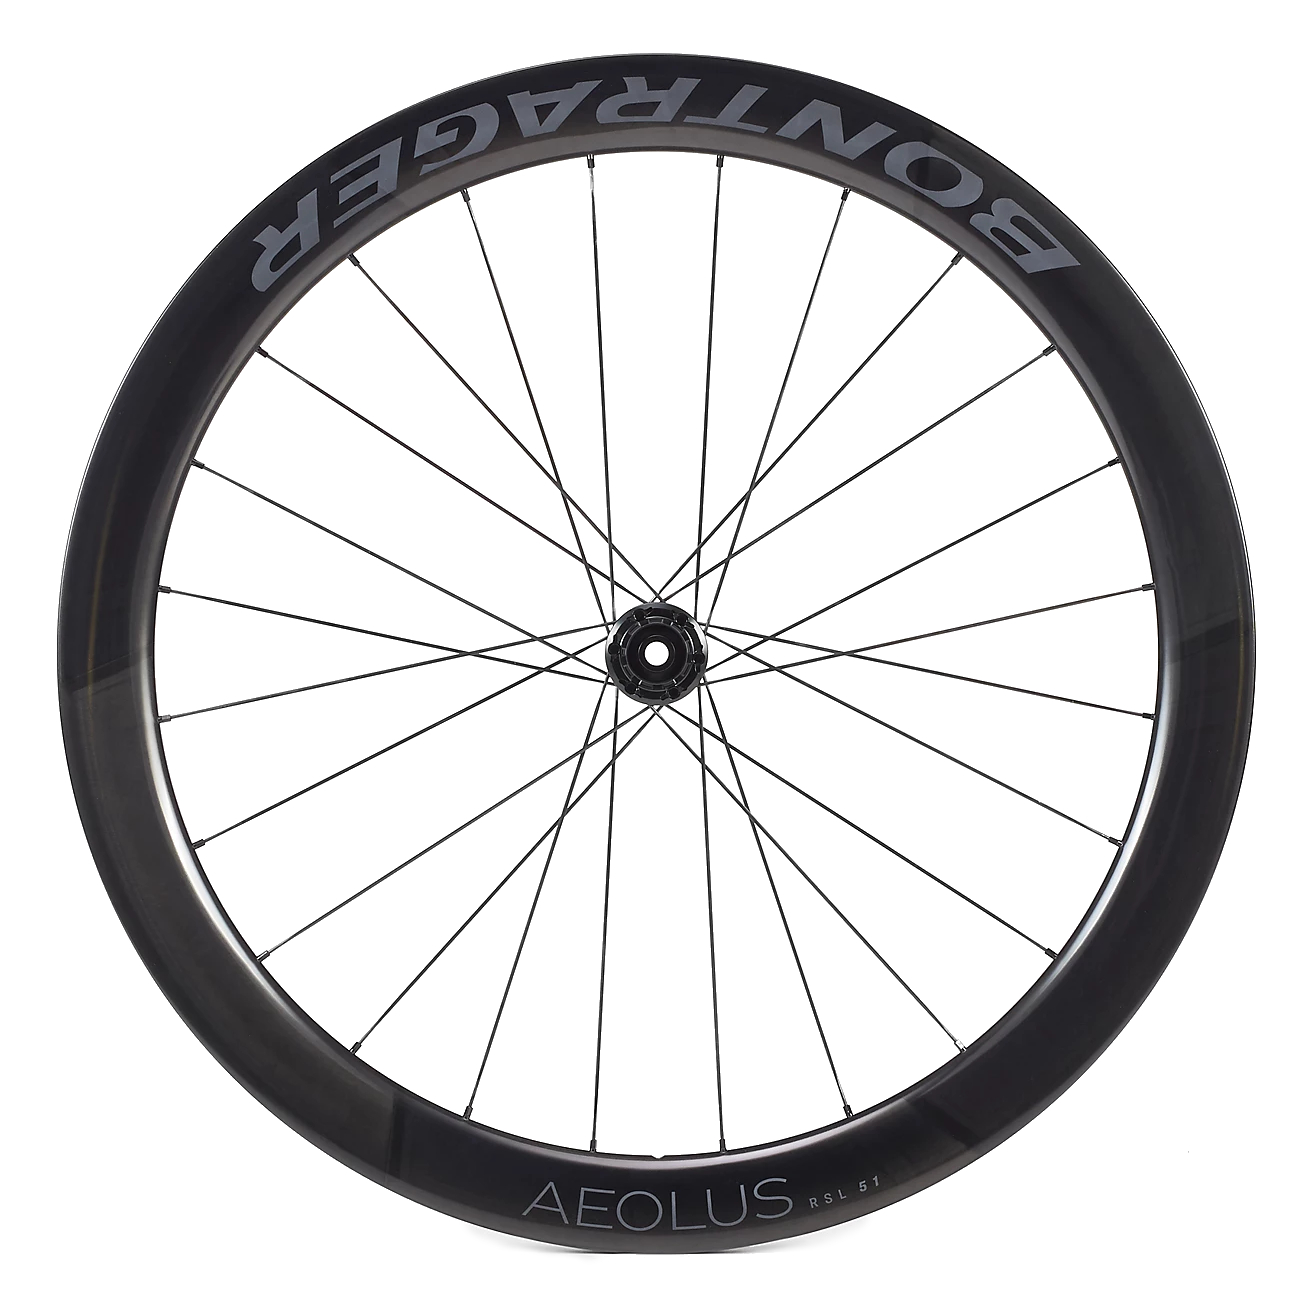 Picture of Bontrager Aeolus RSL 51 TLR Disc Carbon Rear Wheel - Clincher / Tubeless - Centerlock - 12x142mm - Shimano HG